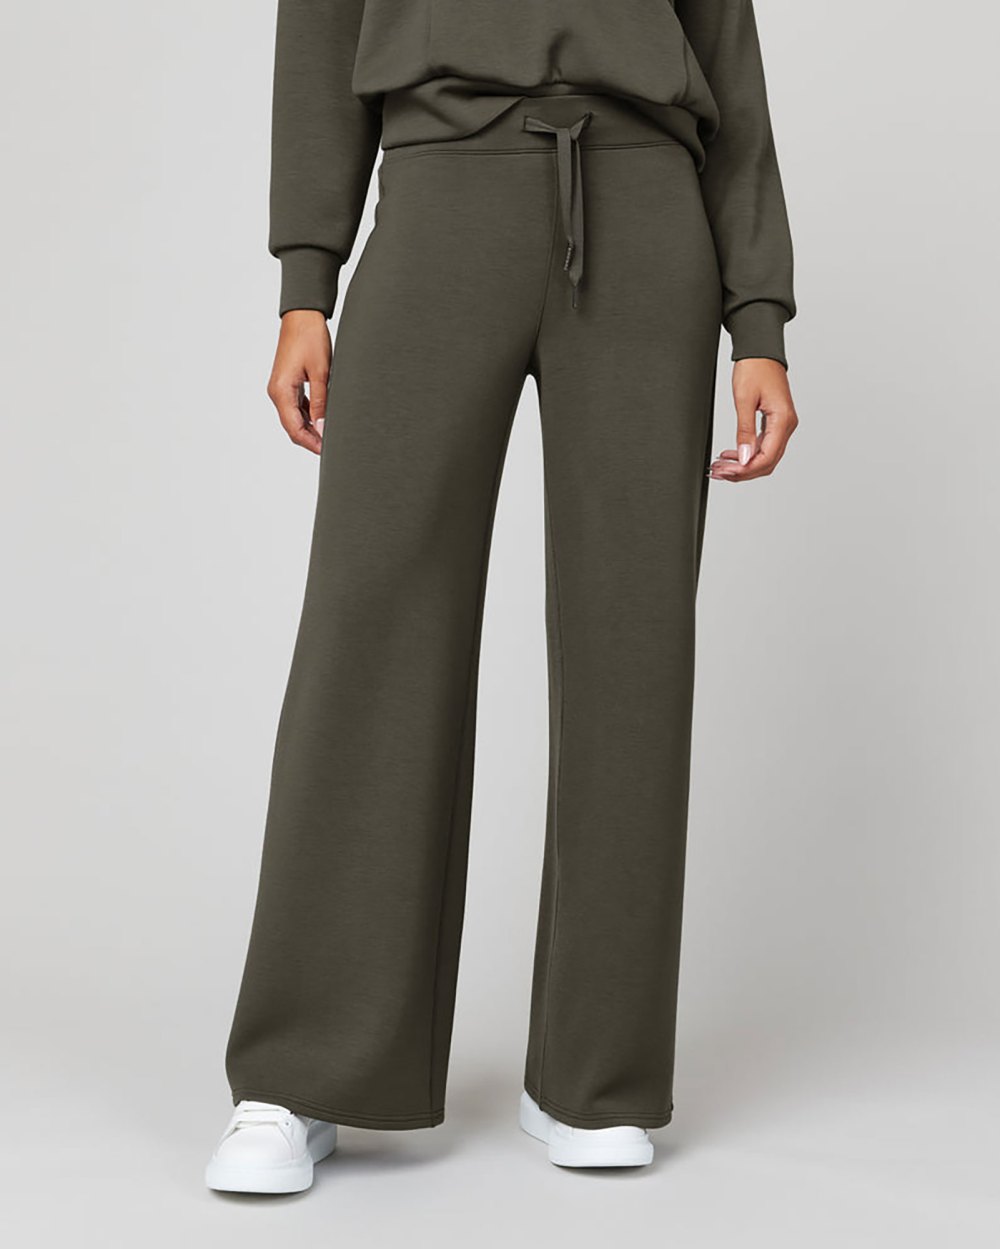 HOW TO STYLE SPANX AIR ESSENTIAL WIDE LEG PANTS // ✨🤍 Spanxs Air Essential  Wide Leg Pants are here and they are so so good! 👏